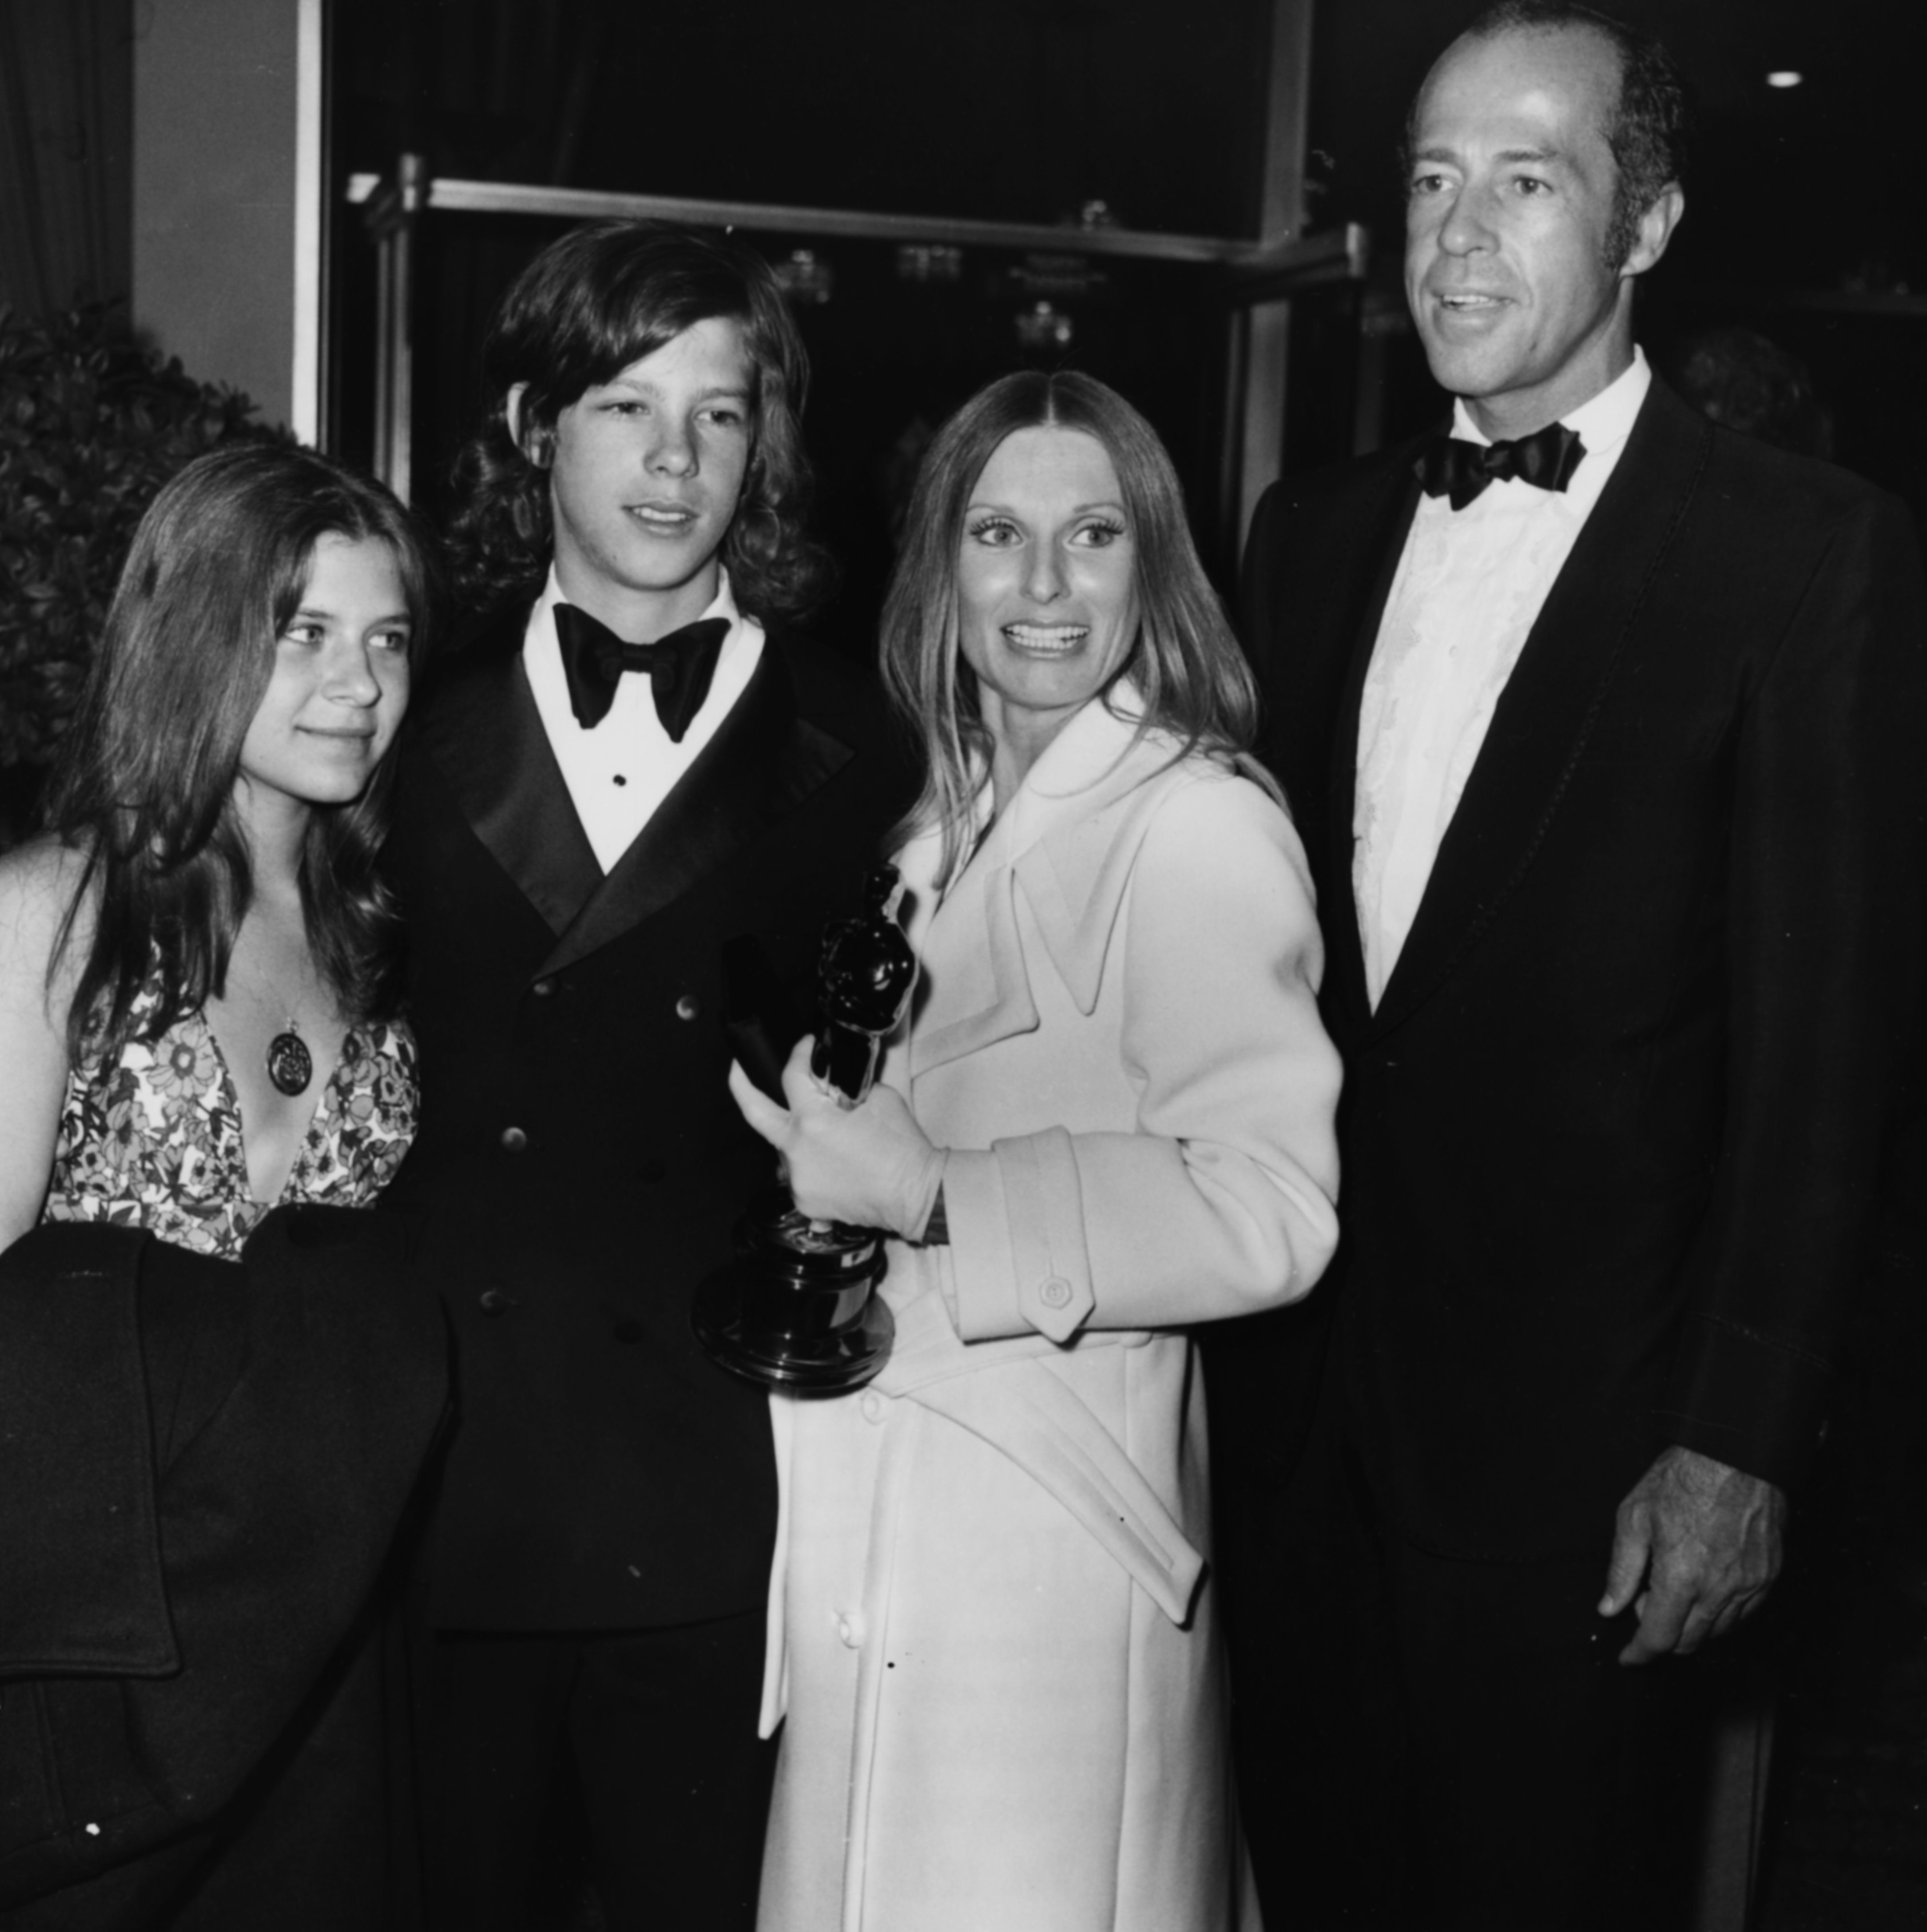 Cloris Leachman with George Englund, their son Brian and his girlfriend Mary at the Academy Awards in April 1972, Los Angeles. / Source: Getty Images